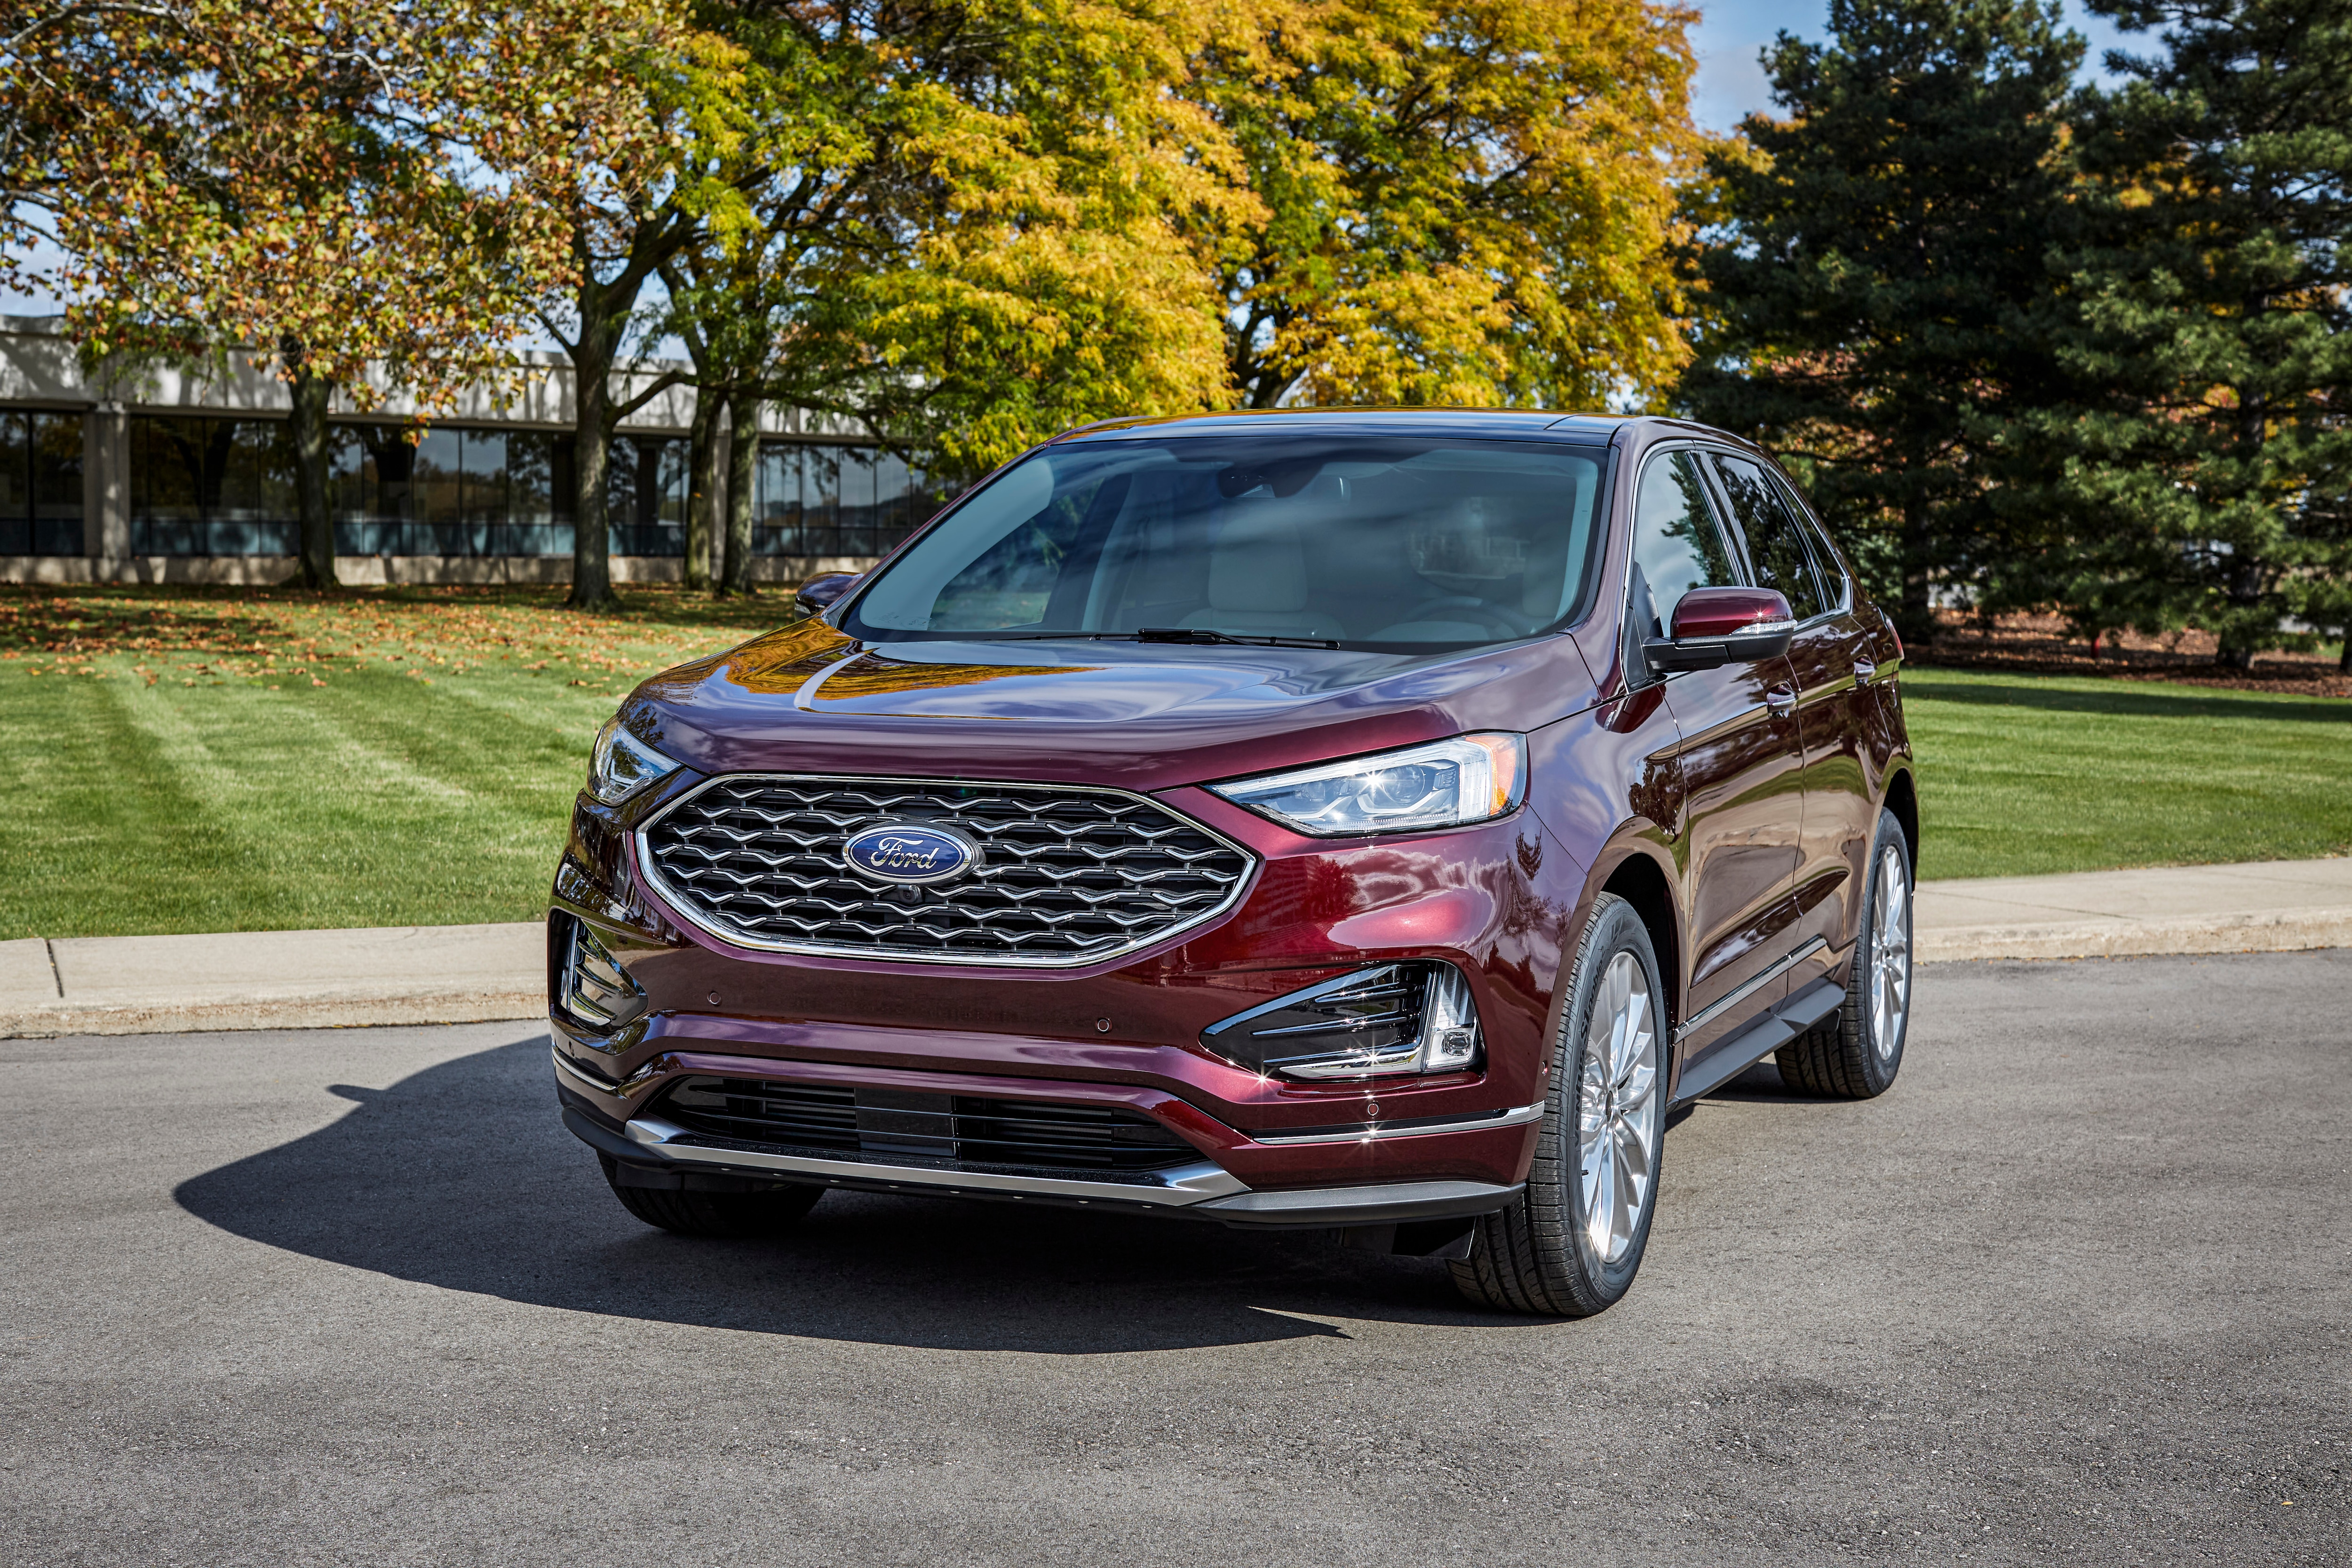 Front facade of the Ford 2021 Edge